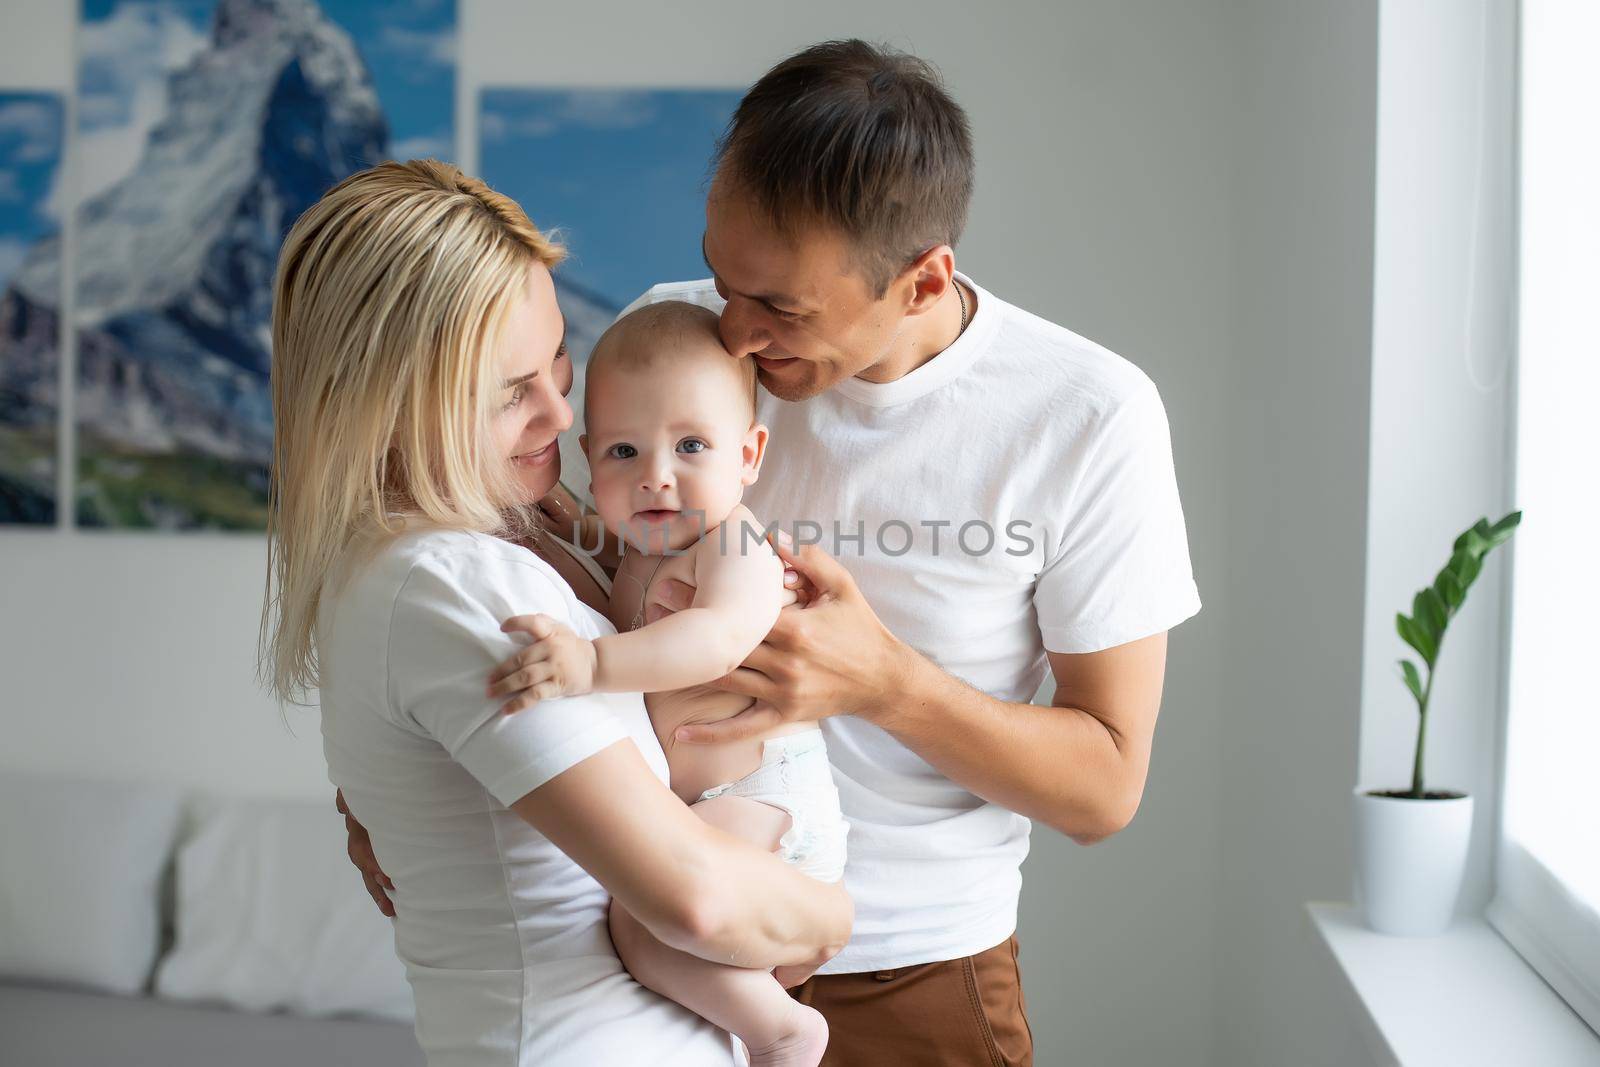 A Happy young family with baby in white bedroom.